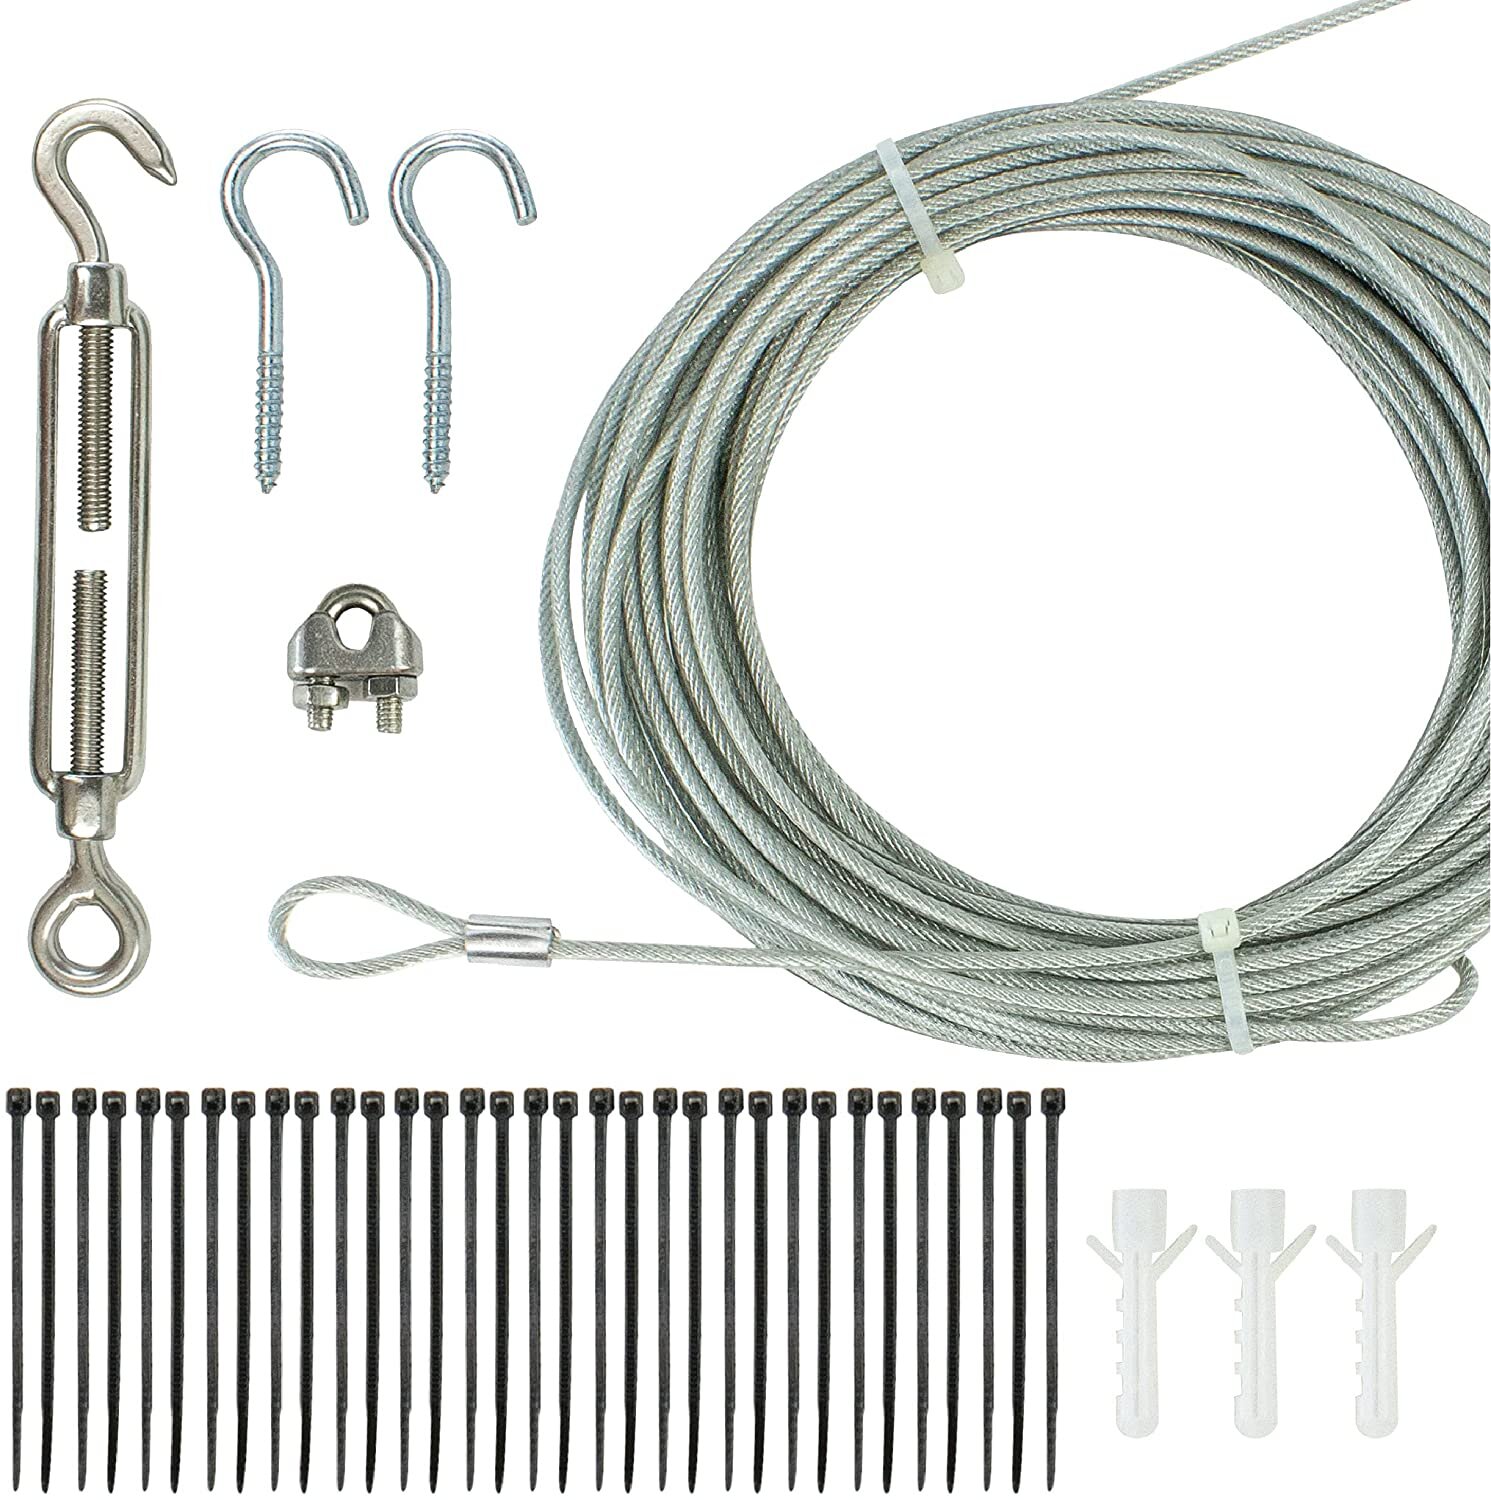 Newhouse Lighting STRINGKIT2 Stainless Steel Hanging/Suspension Kit With  Vinyl Coated Wire For Outdoor Patio Lights Up To 48 Ft. Includes Turnbuckle